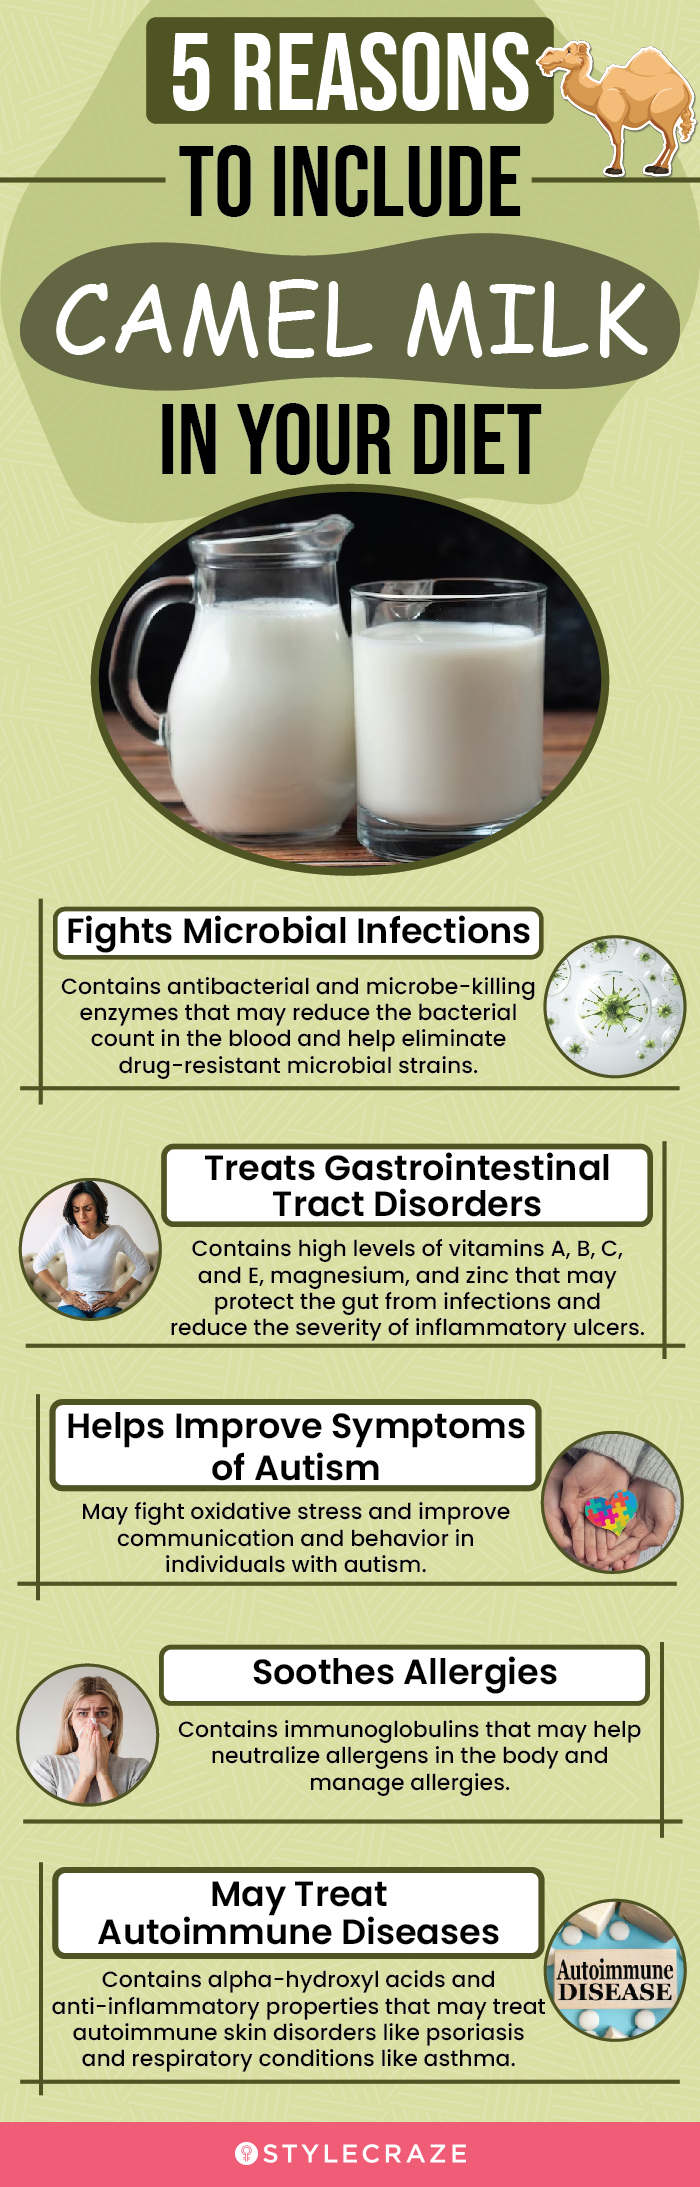 5 reasons to include camel milk in your diet (infographic)